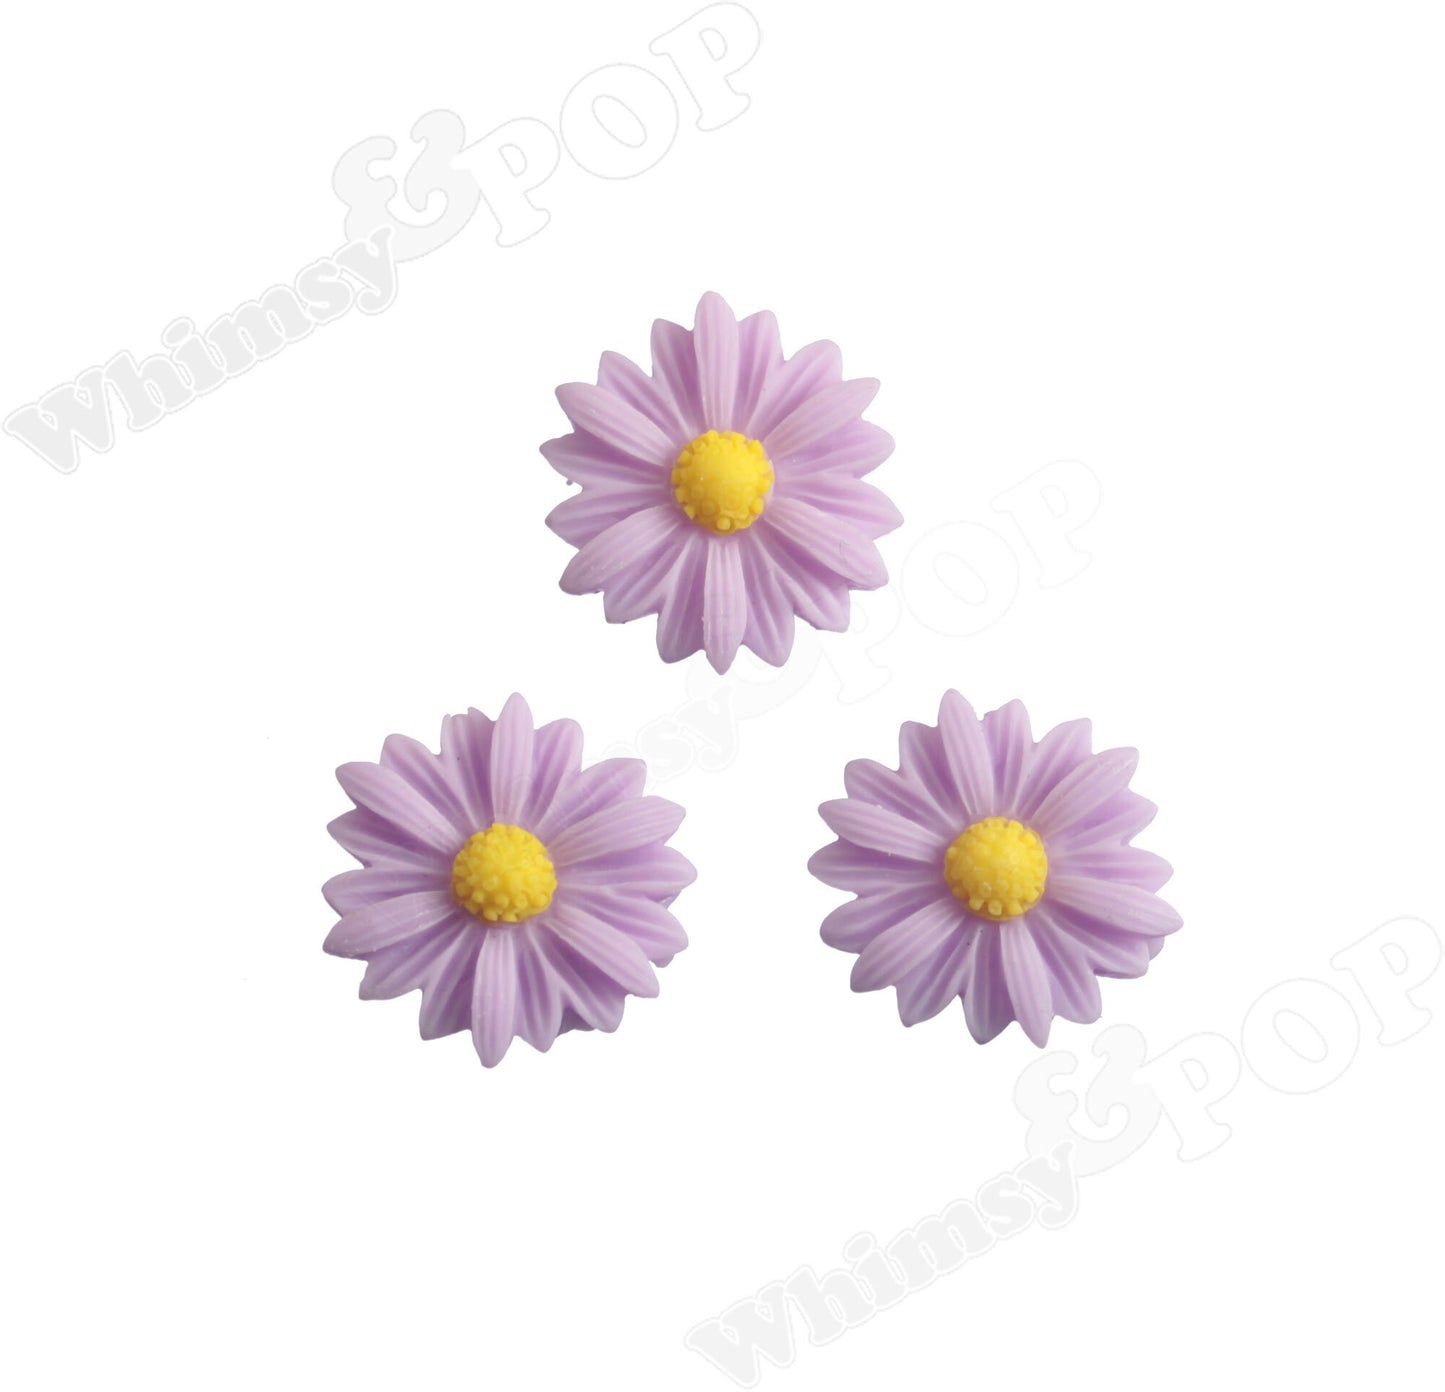 22MM Large Gerber Daisy Cabochons, Sunflower Resin Cabochons, Daisy Flatback Cabochons,  Red White Yellow Pink Purple Green Daisies, 22x7mm